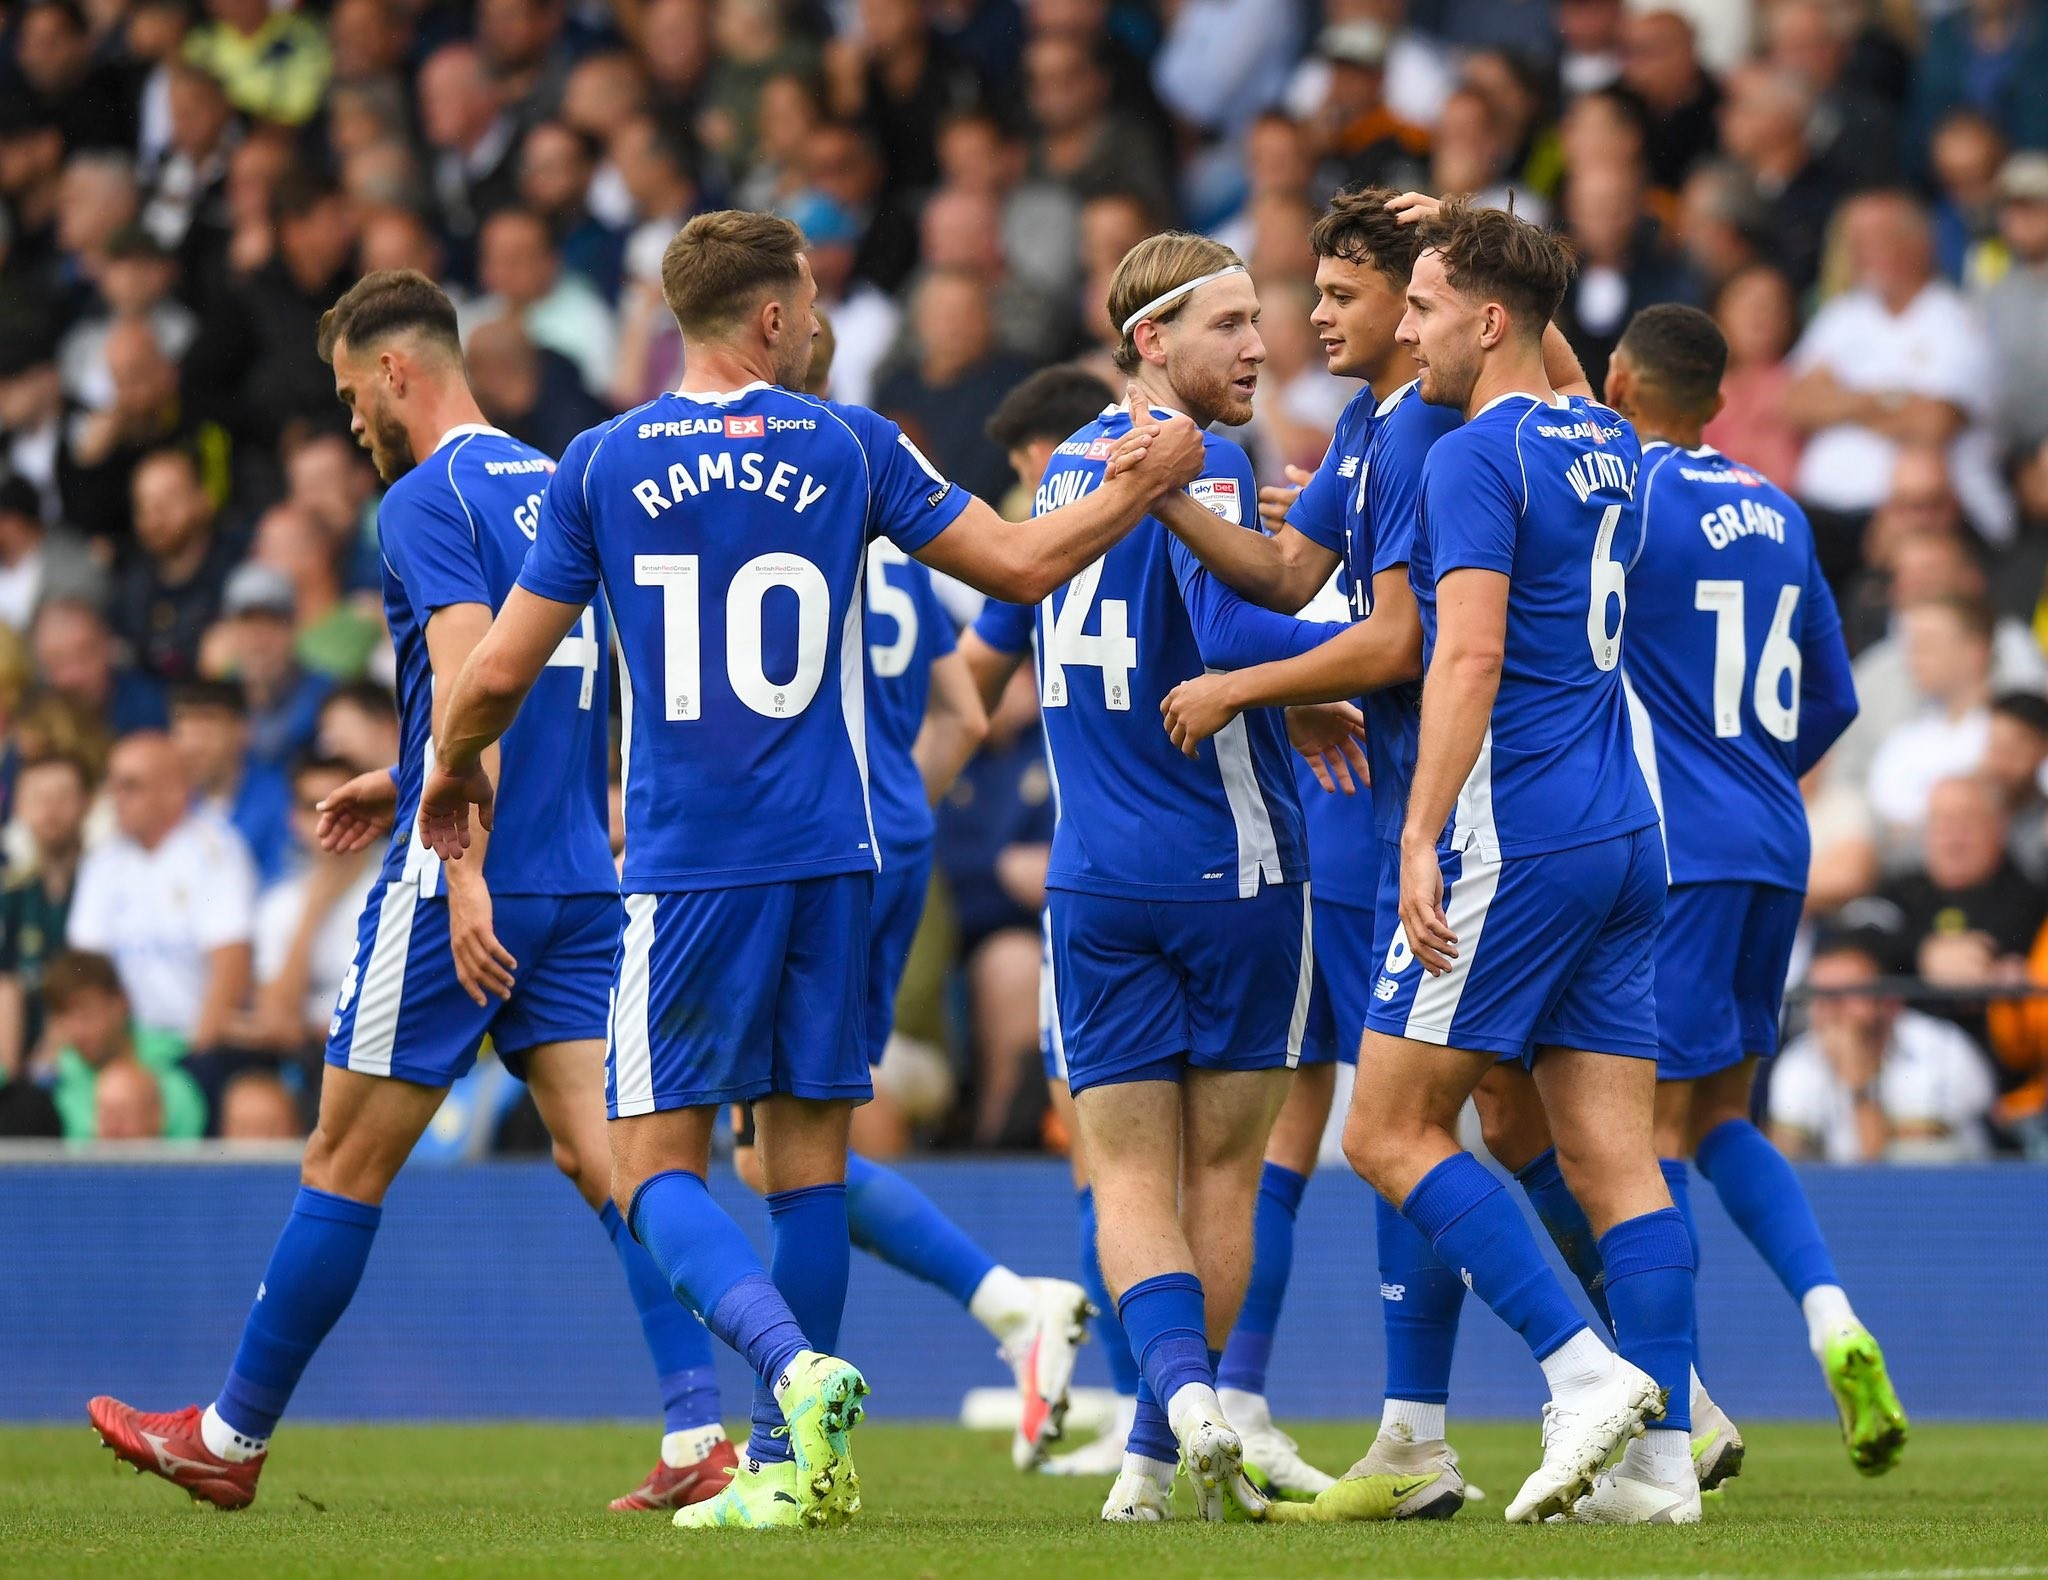 A draw snatched from the jaws of victory, but Cardiff are back on track